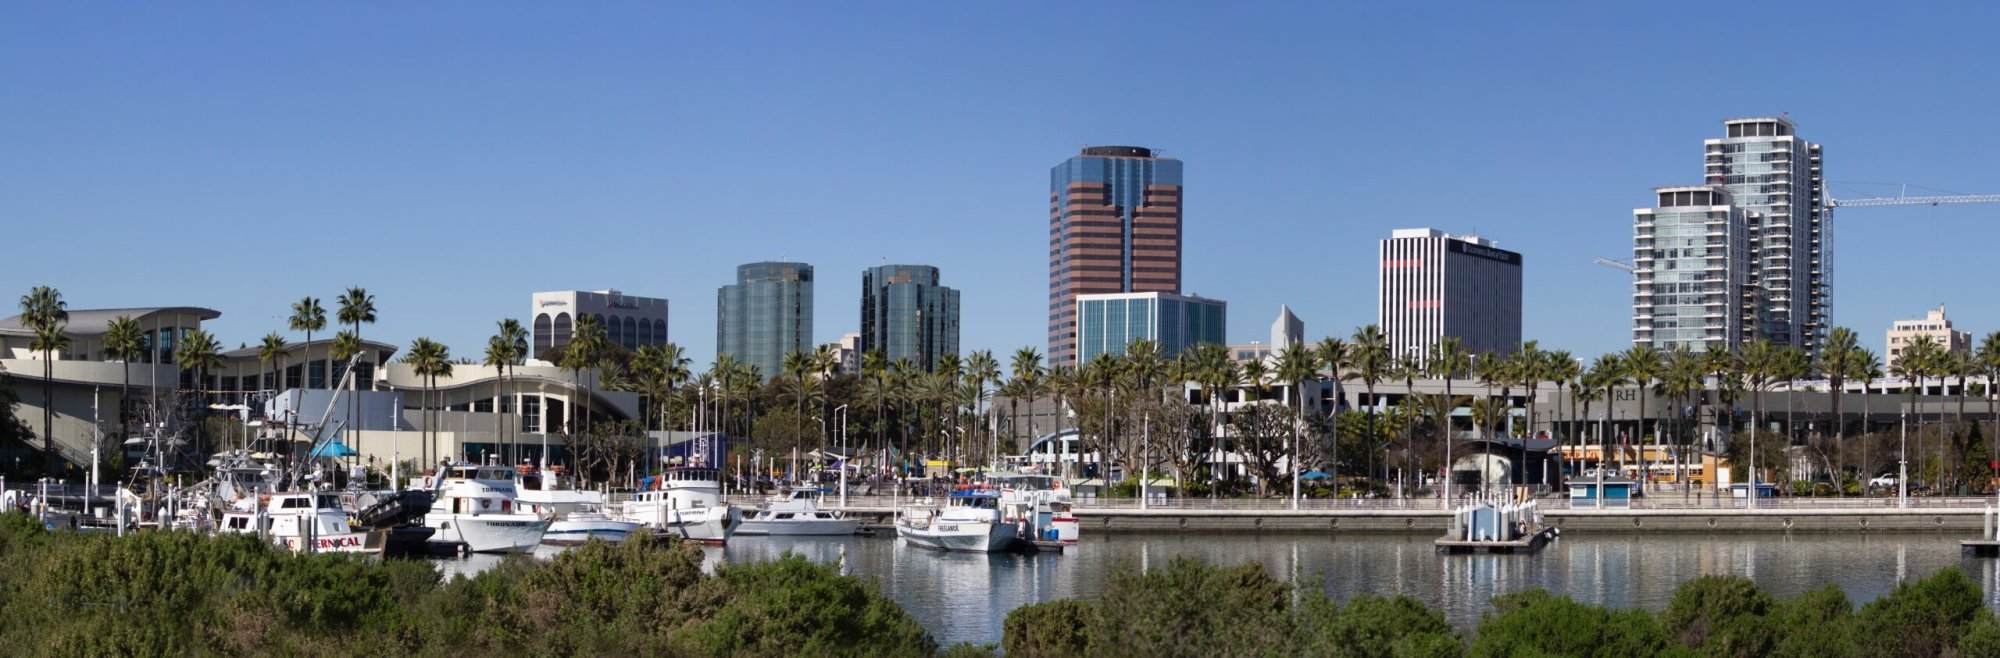 San diego harbor with boats docked in front of tall buildings.